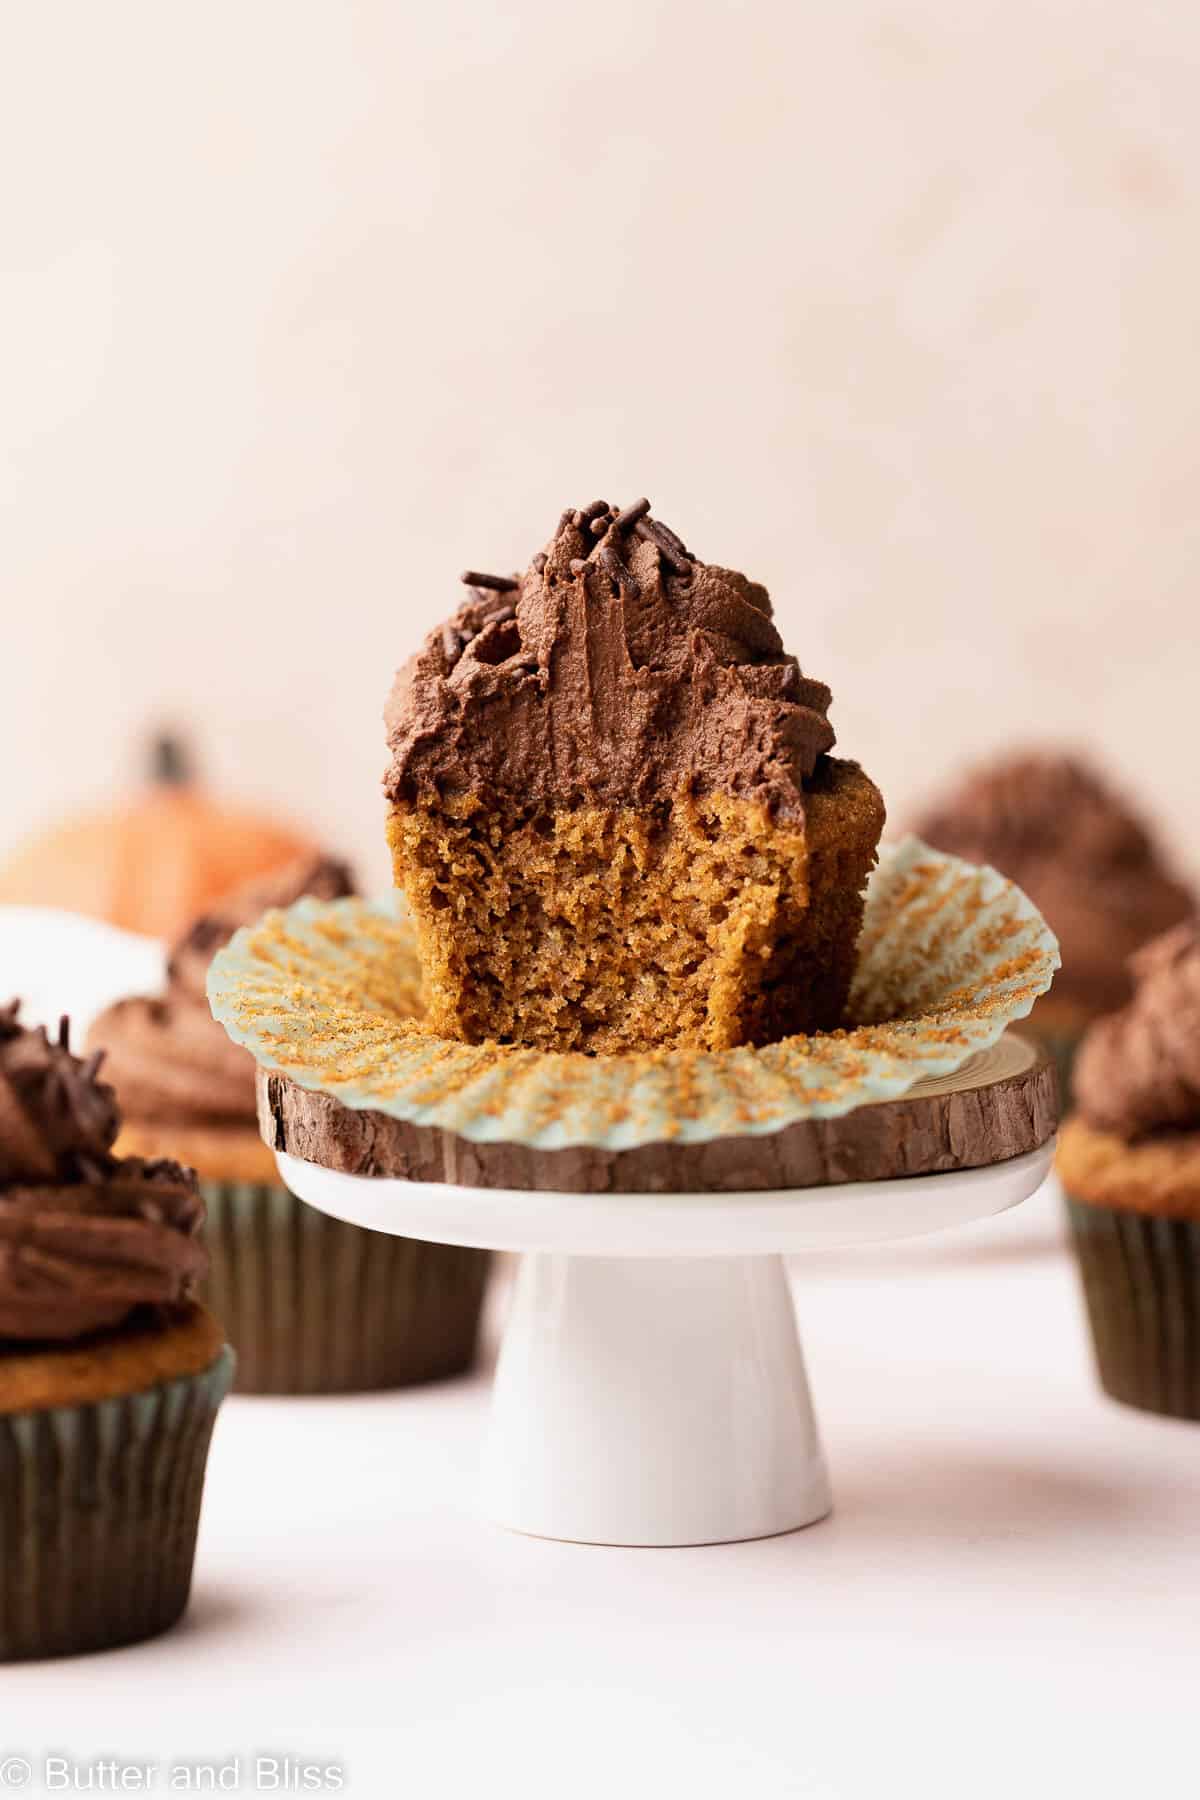 A gluten free pumpkin cupcake with chocolate frosting cut in half and placed on a small cupcake stand.